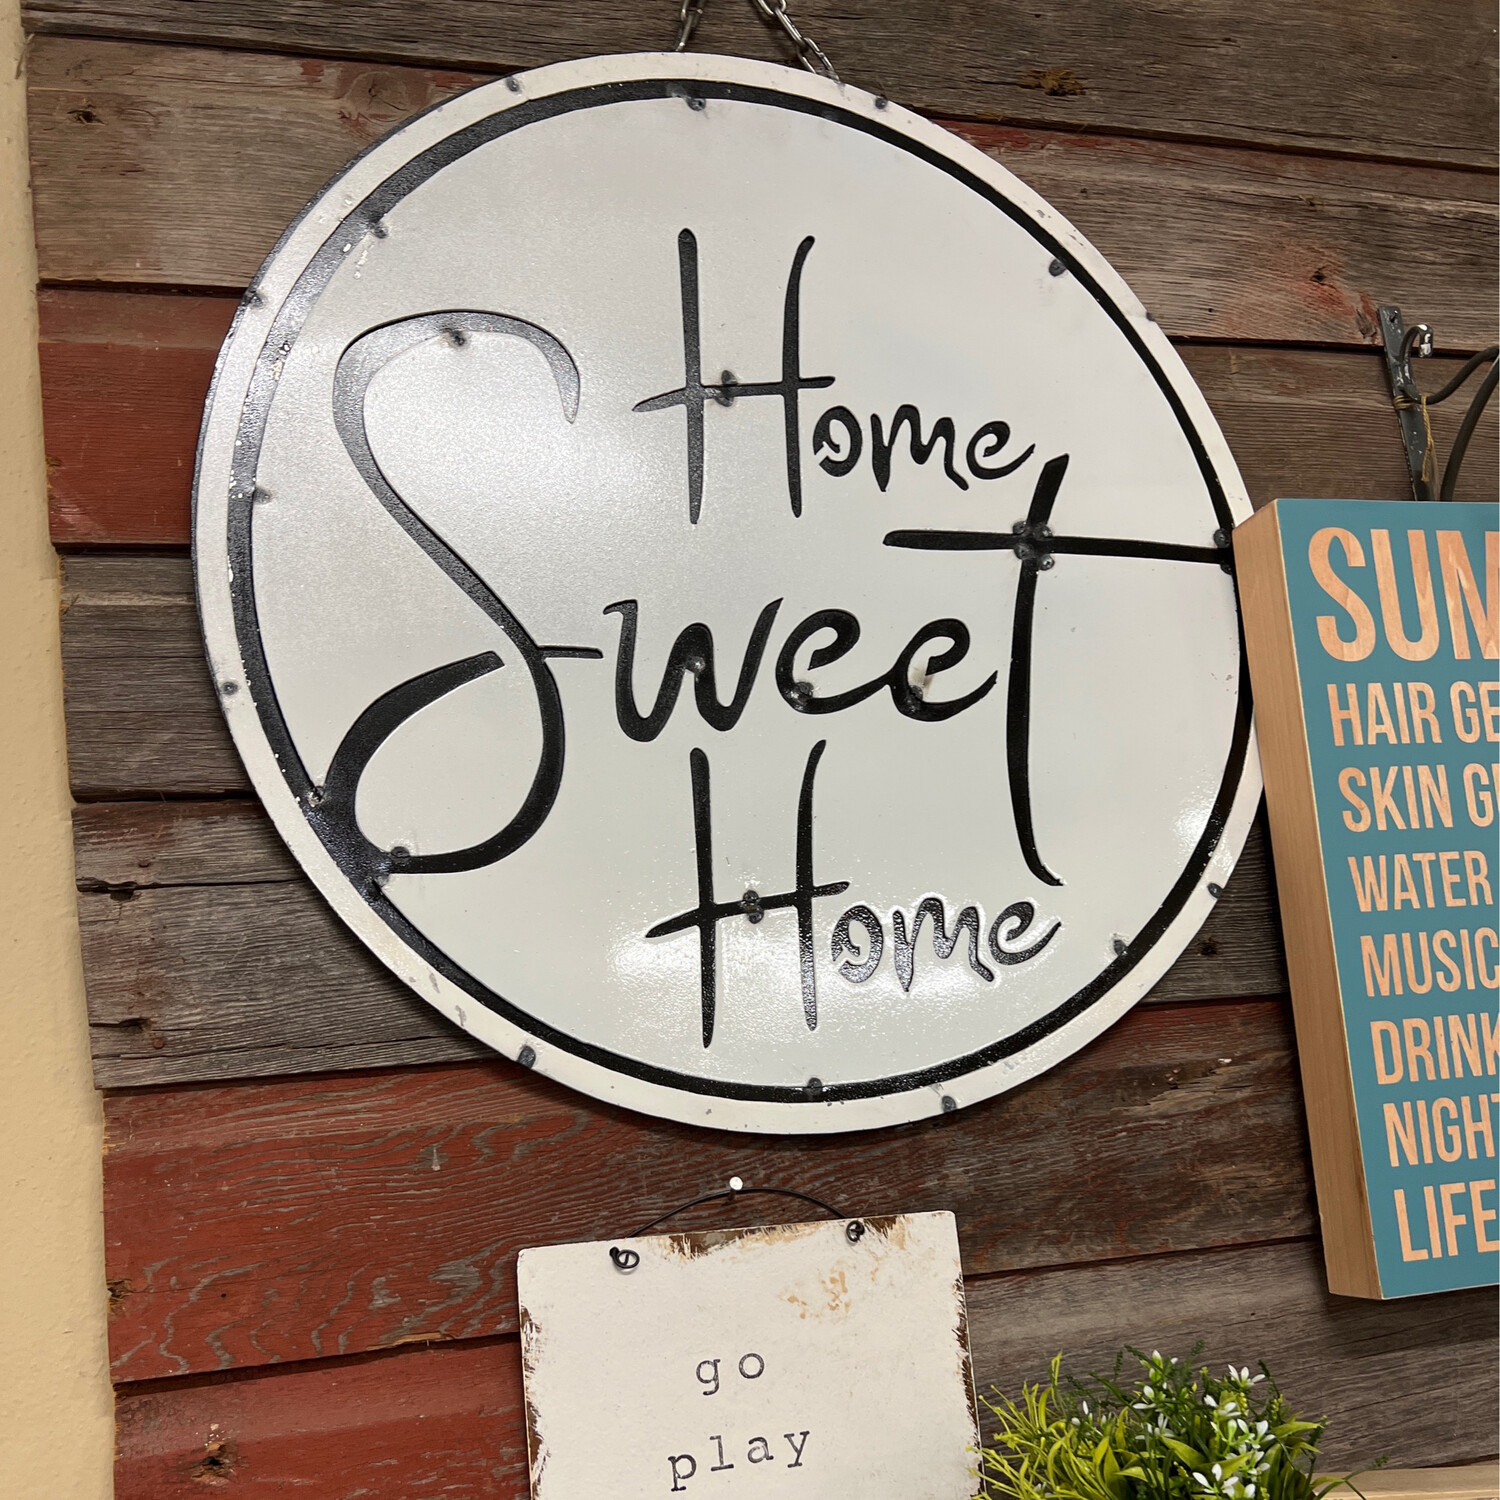 Home Sweet Home Round Sign